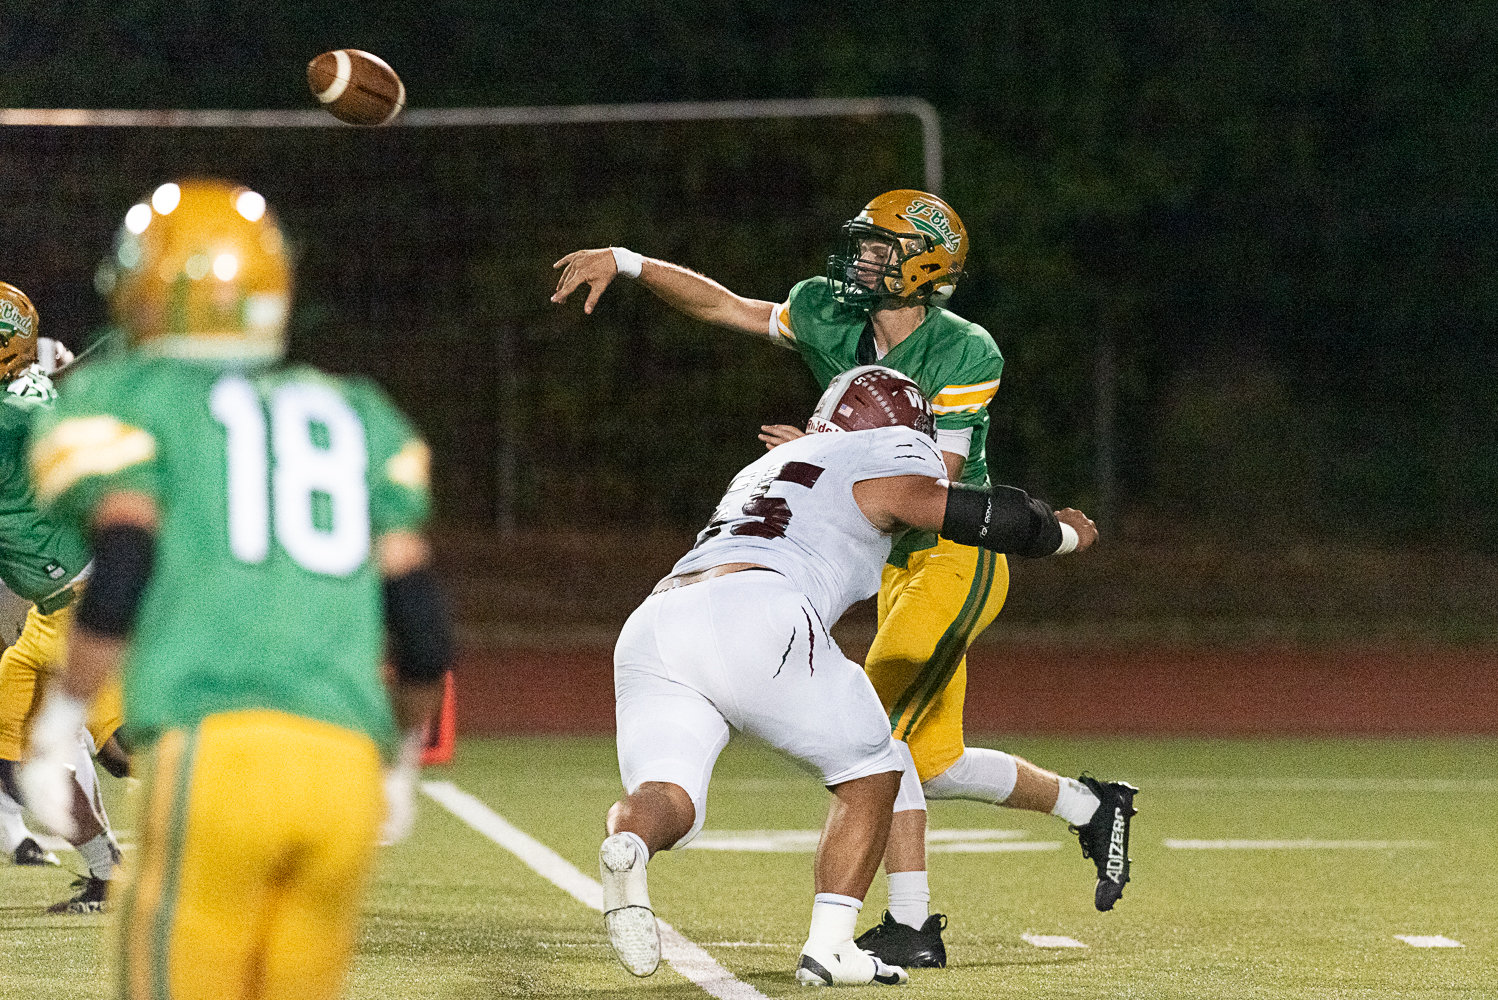 Daniel Matagi hits Tumwater quarterback Alex Overback hard as he releases the ball during W.F. West's 28-7 win over the T-Birds on Sept. 30.